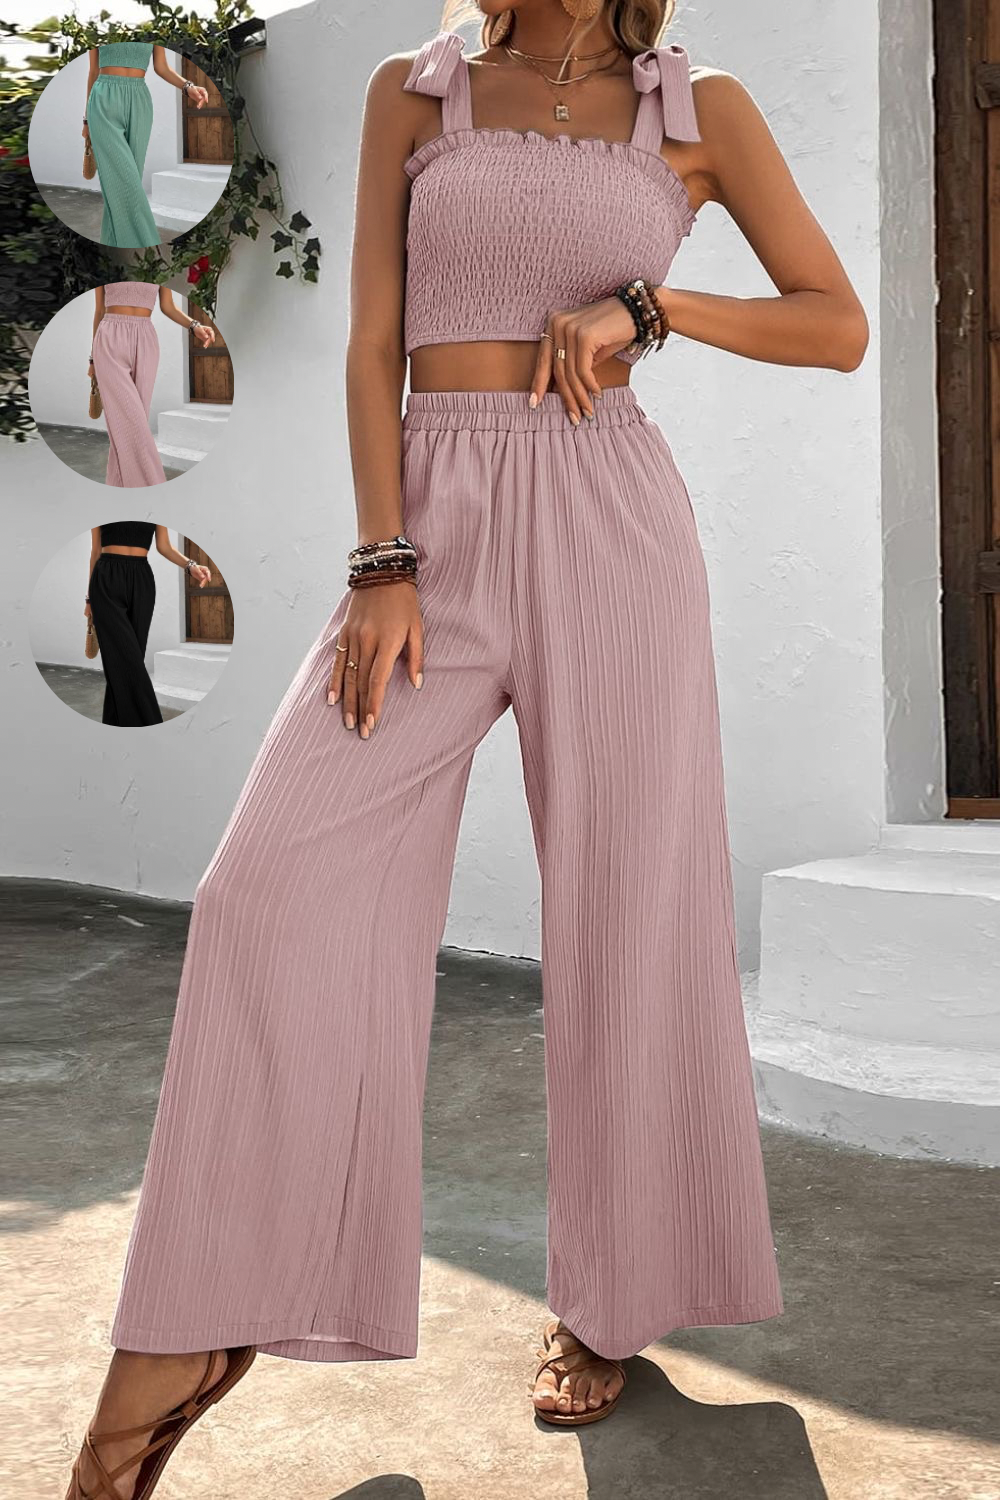 Womens Misses 2-piece Outfit Set including a Stretchy Smocked Crop Top with adjustable tie shoulder straps, Comfort Stretch Elastic Waist Wide Leg Palazzo Pants available in 3 colors: Gum Leaf Green, Light Mauve Pink, and Solid Black